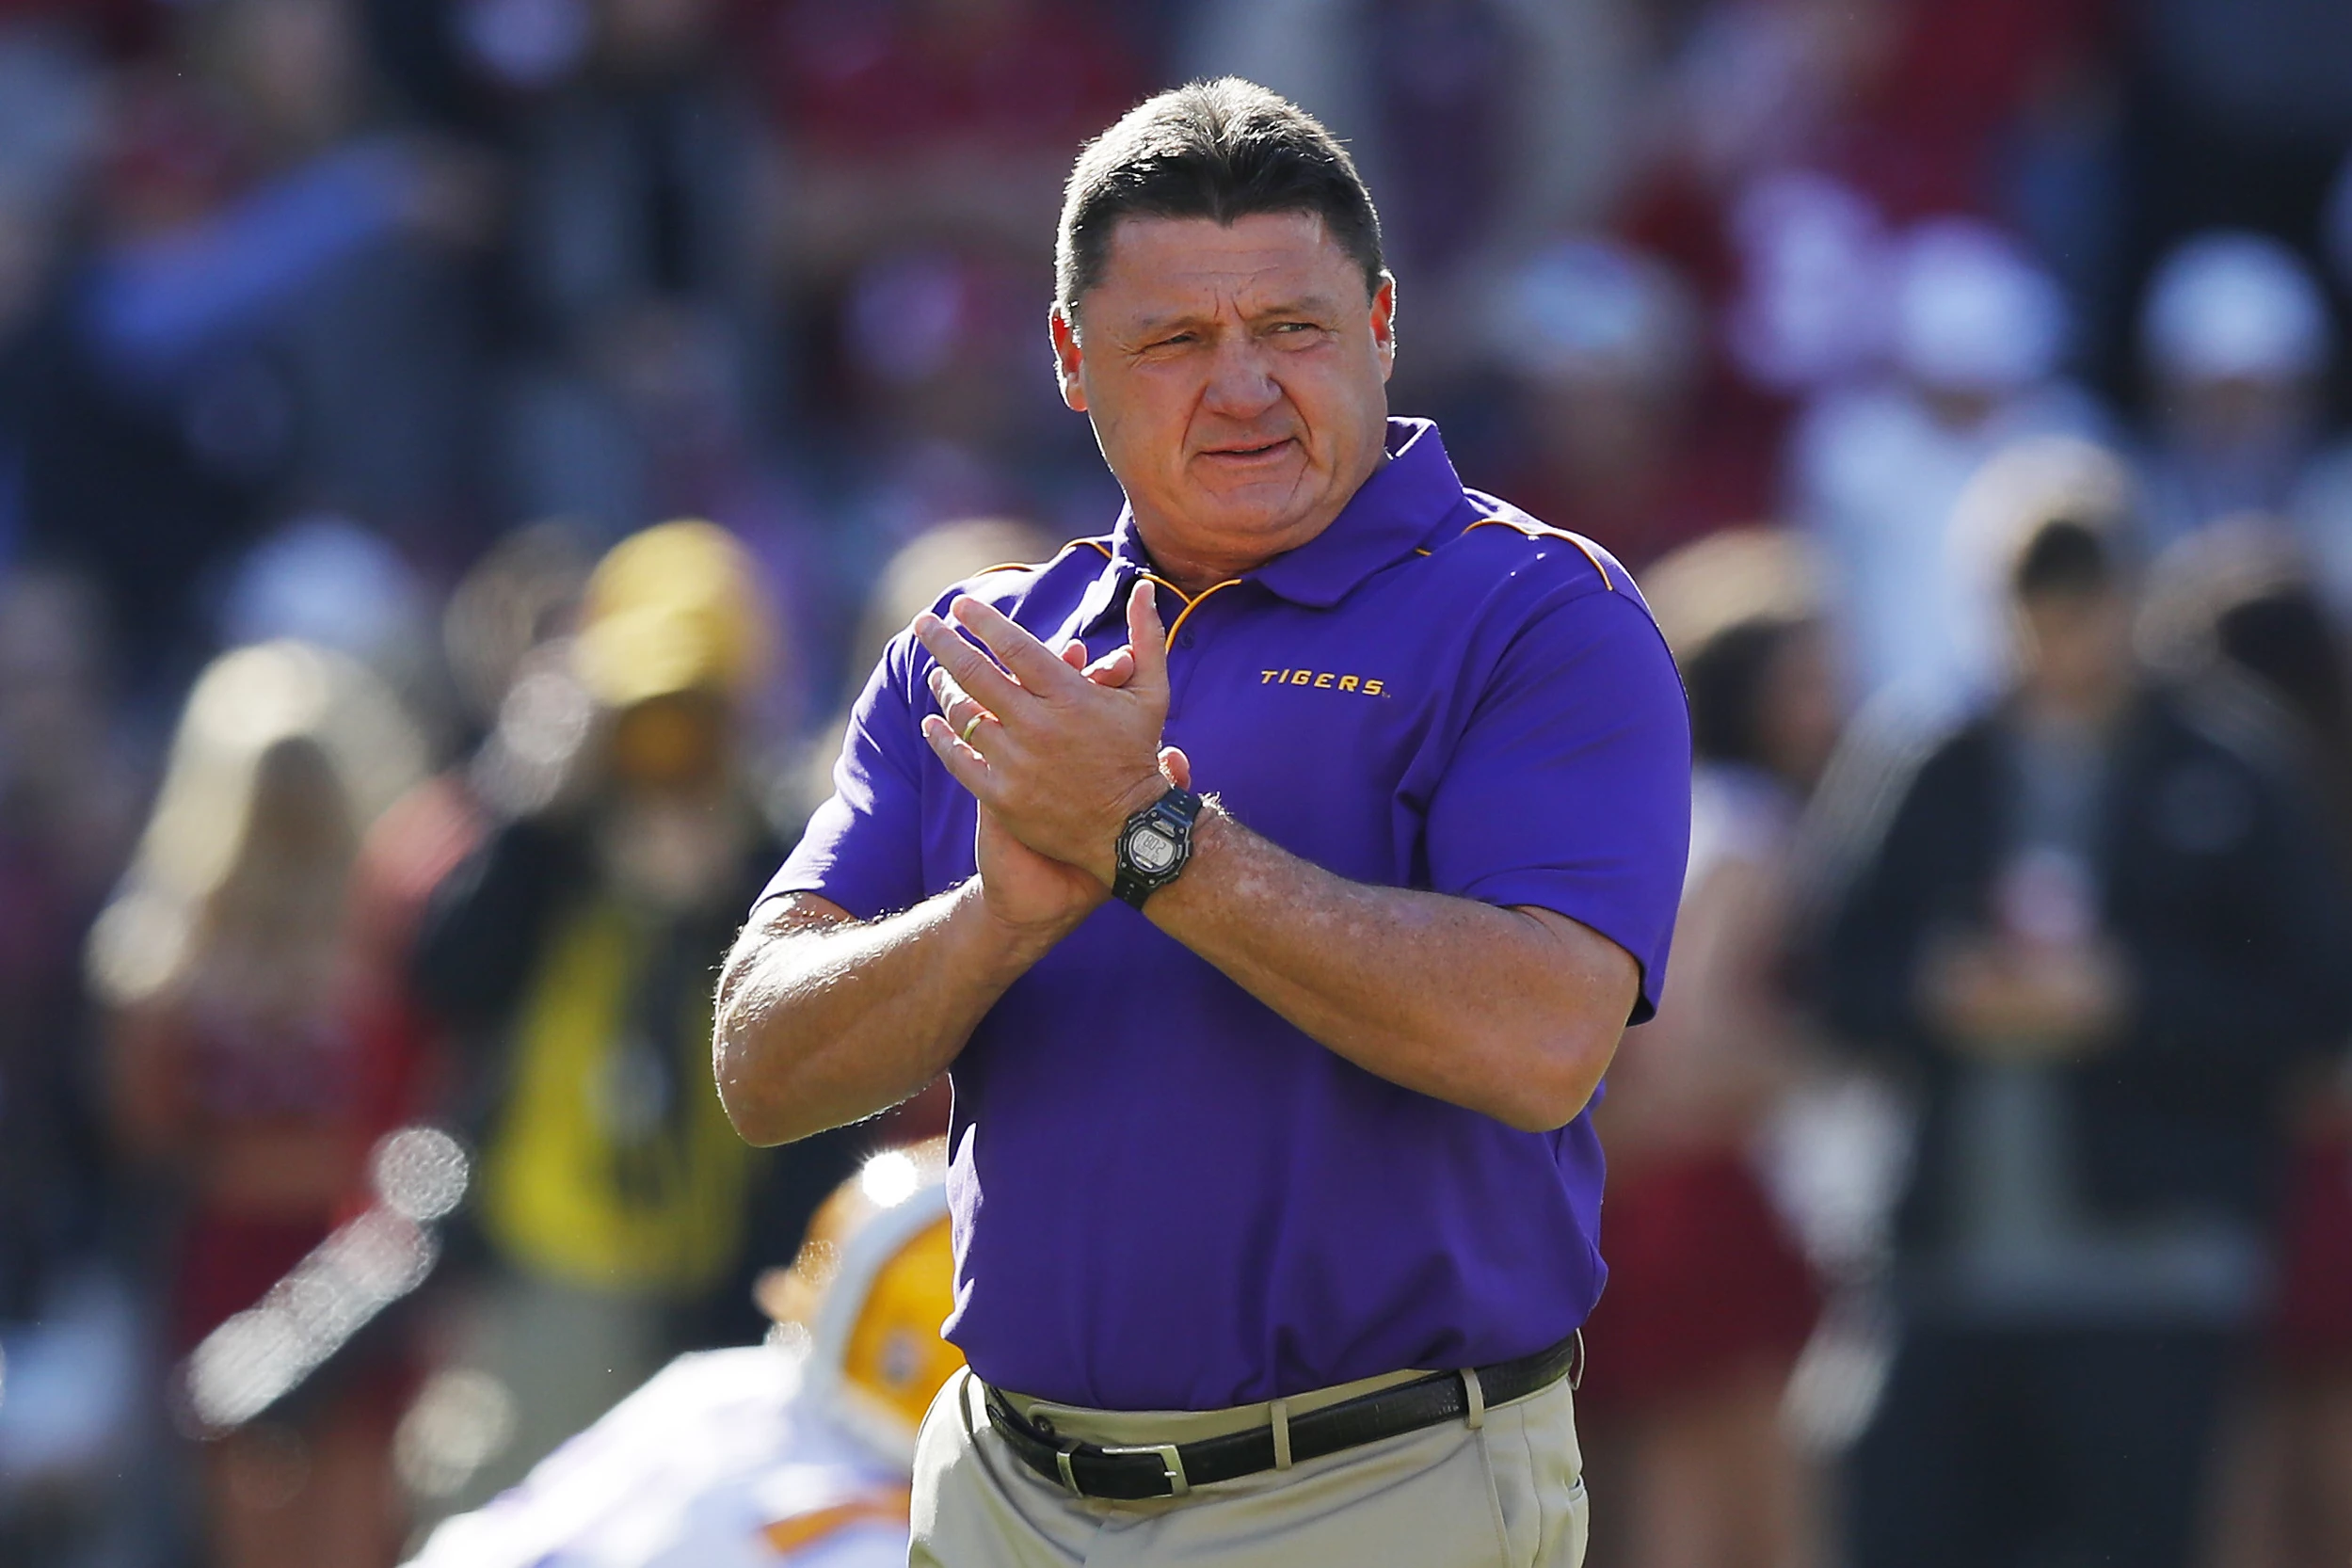 What LSU coach Ed Orgeron and son Cody Orgeron said after squaring off